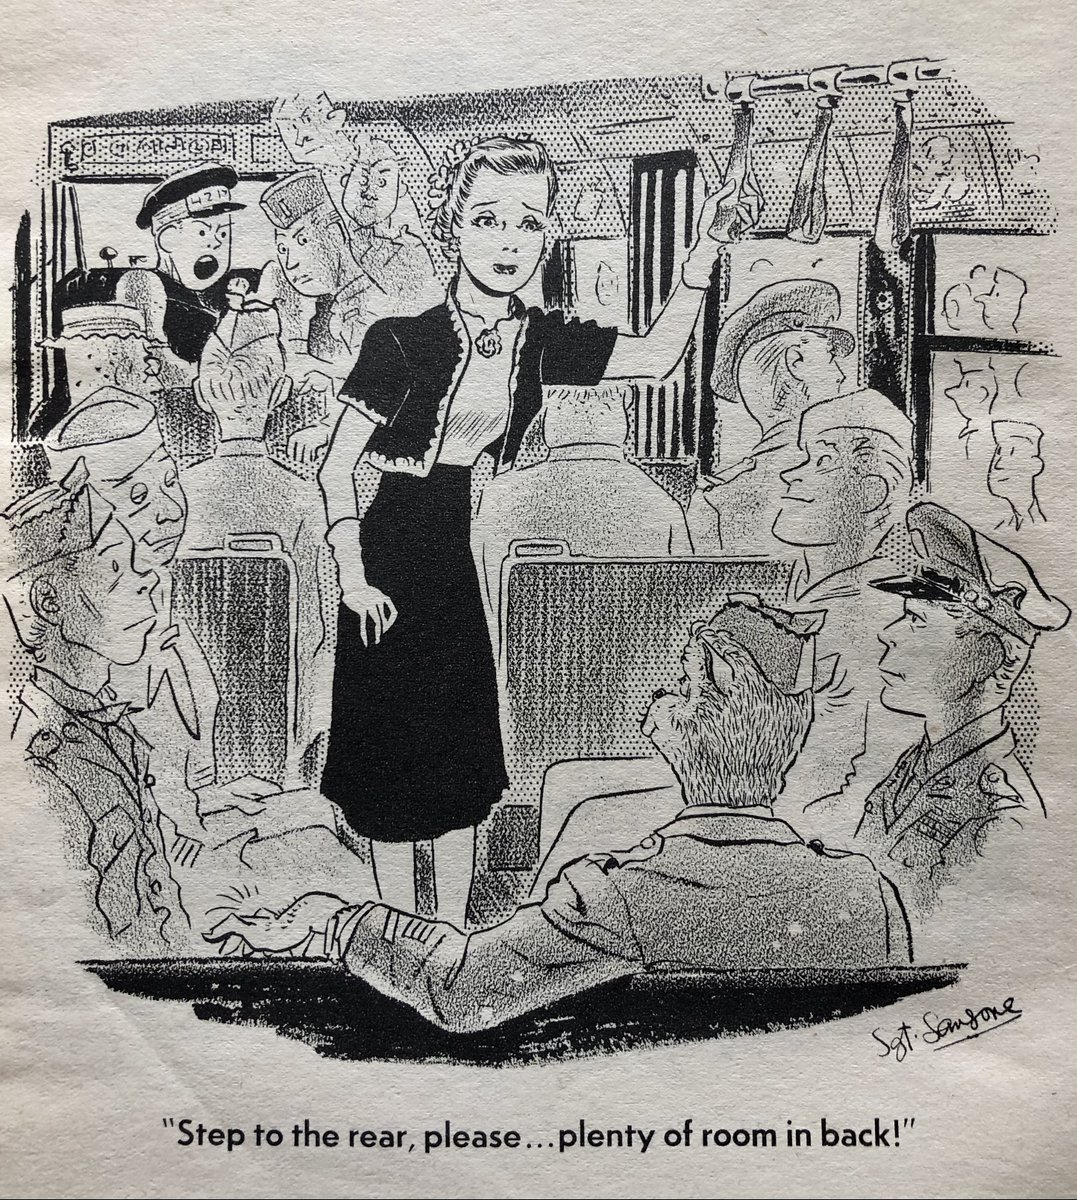 /thread/ In my War & Gender course this semester, I was introduced to "The Wolf," a  #WWII cartoon by Sgt. Leonard Sansone, playing off the "wolfish Casanova" cliché.This final cartoon in Sansone's 1945 book, The Wolf, is frightening, clearly seen in the woman's face.